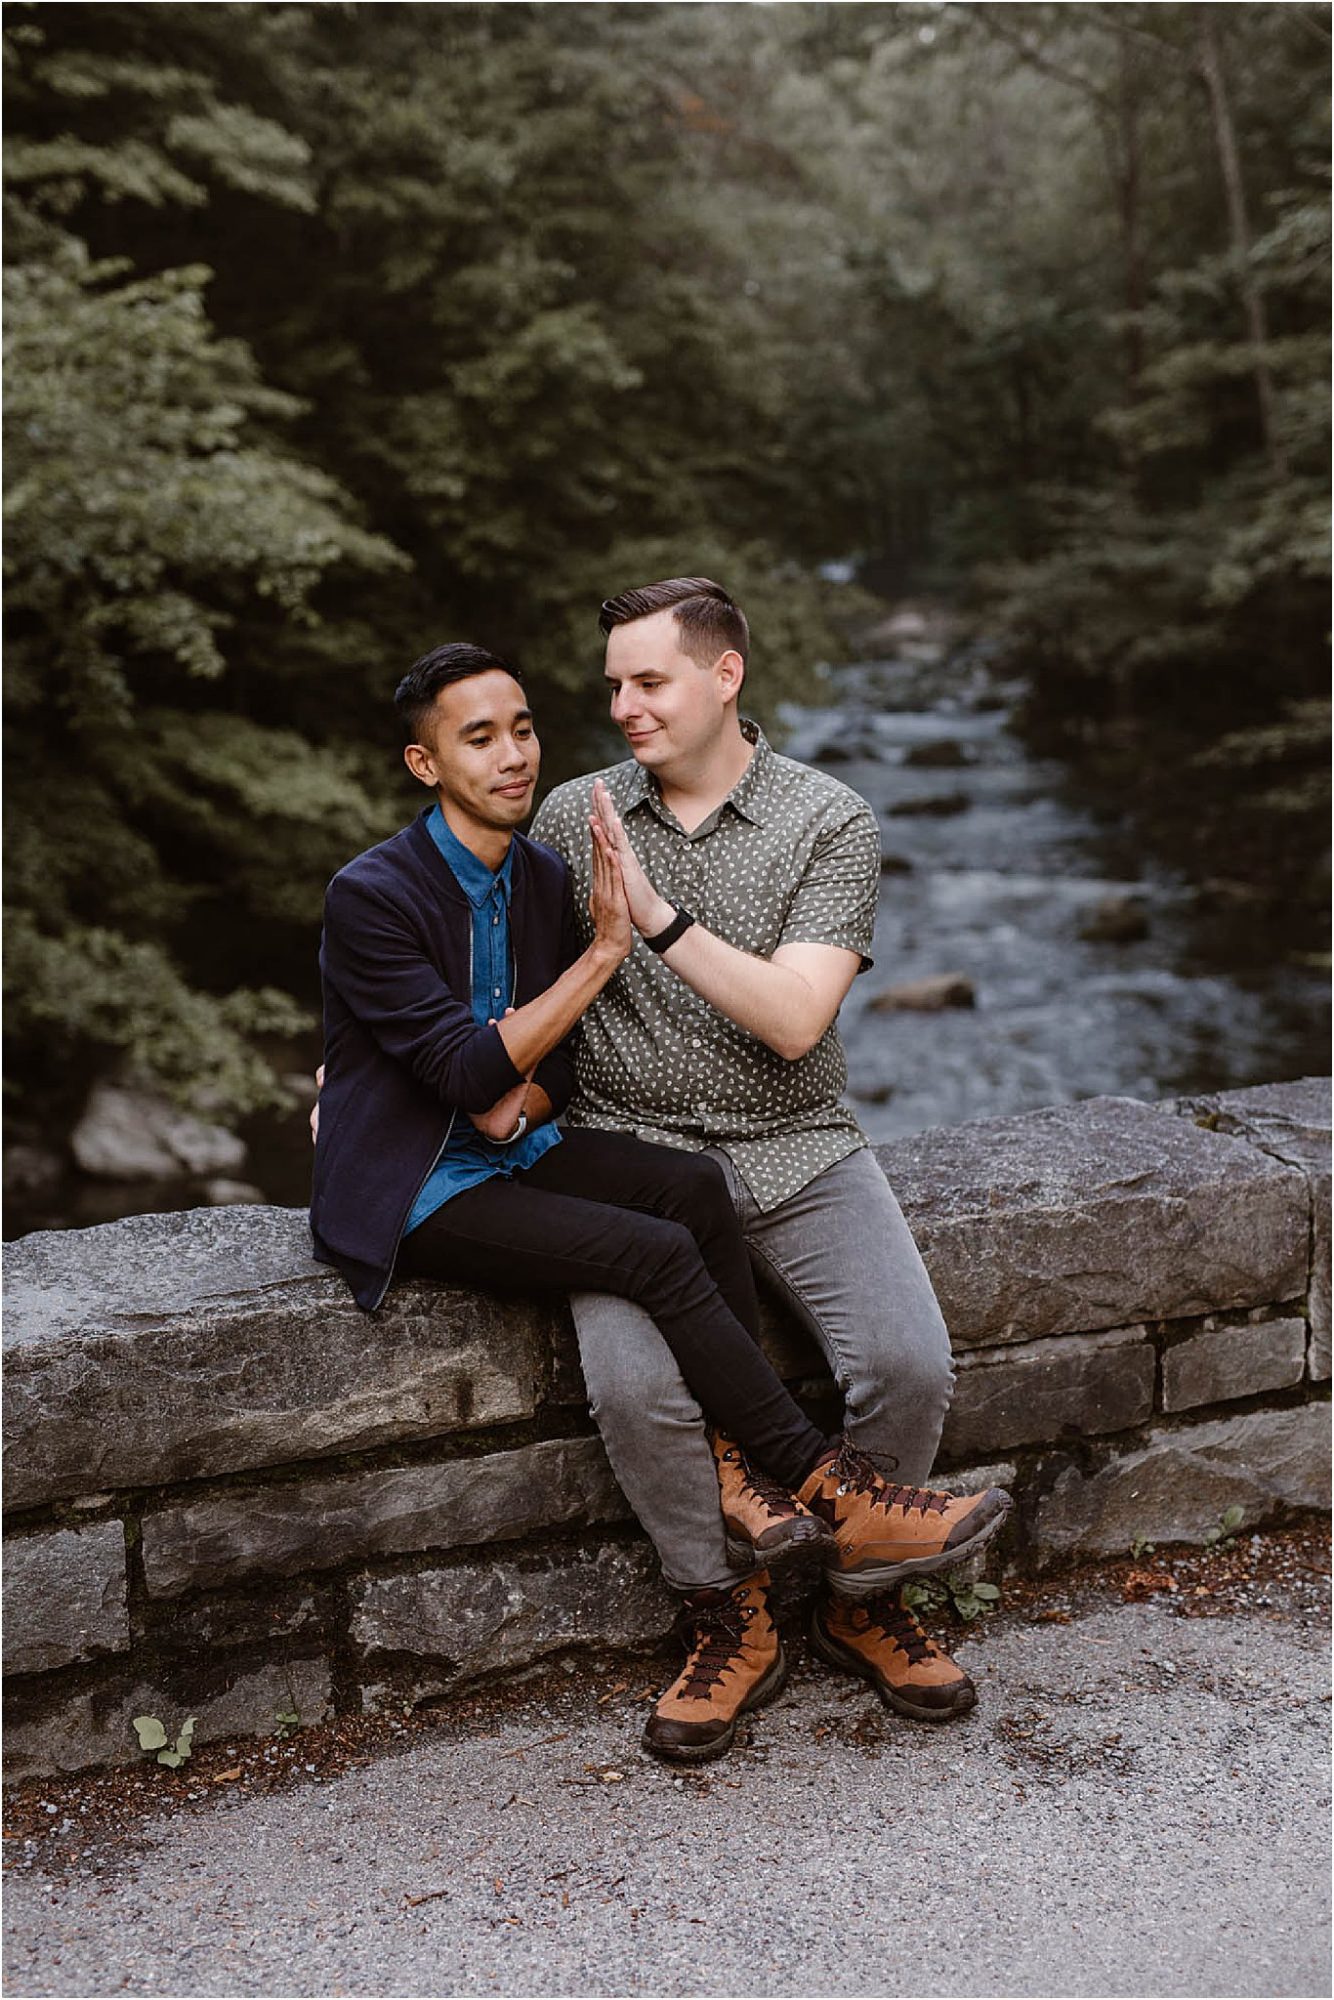 Great Smoky Mountains Couples Photos in HIstoric Elkmont